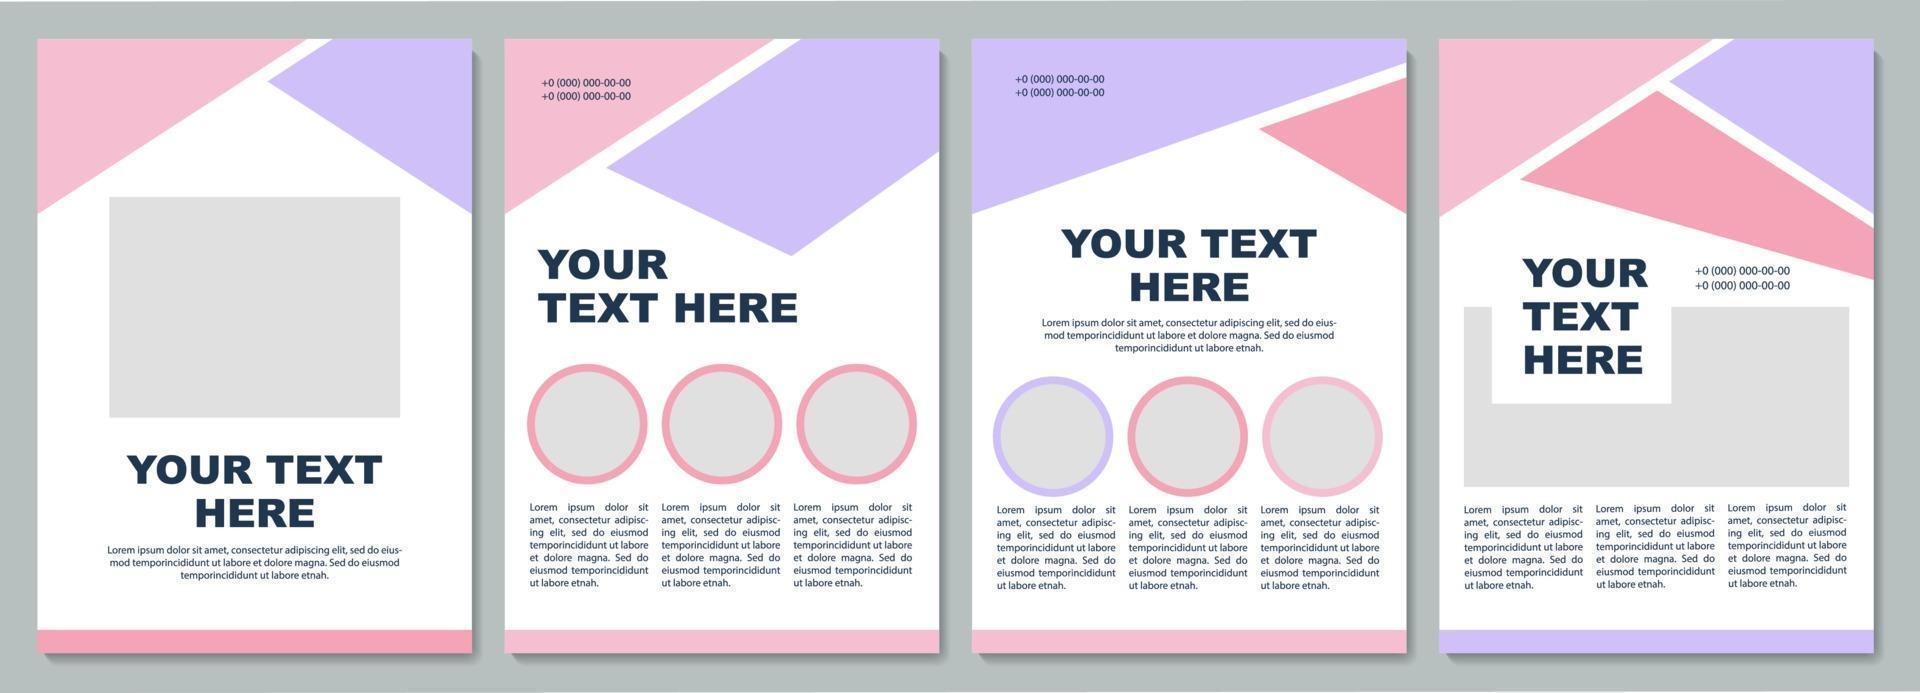 Corporate strategy brochure template vector